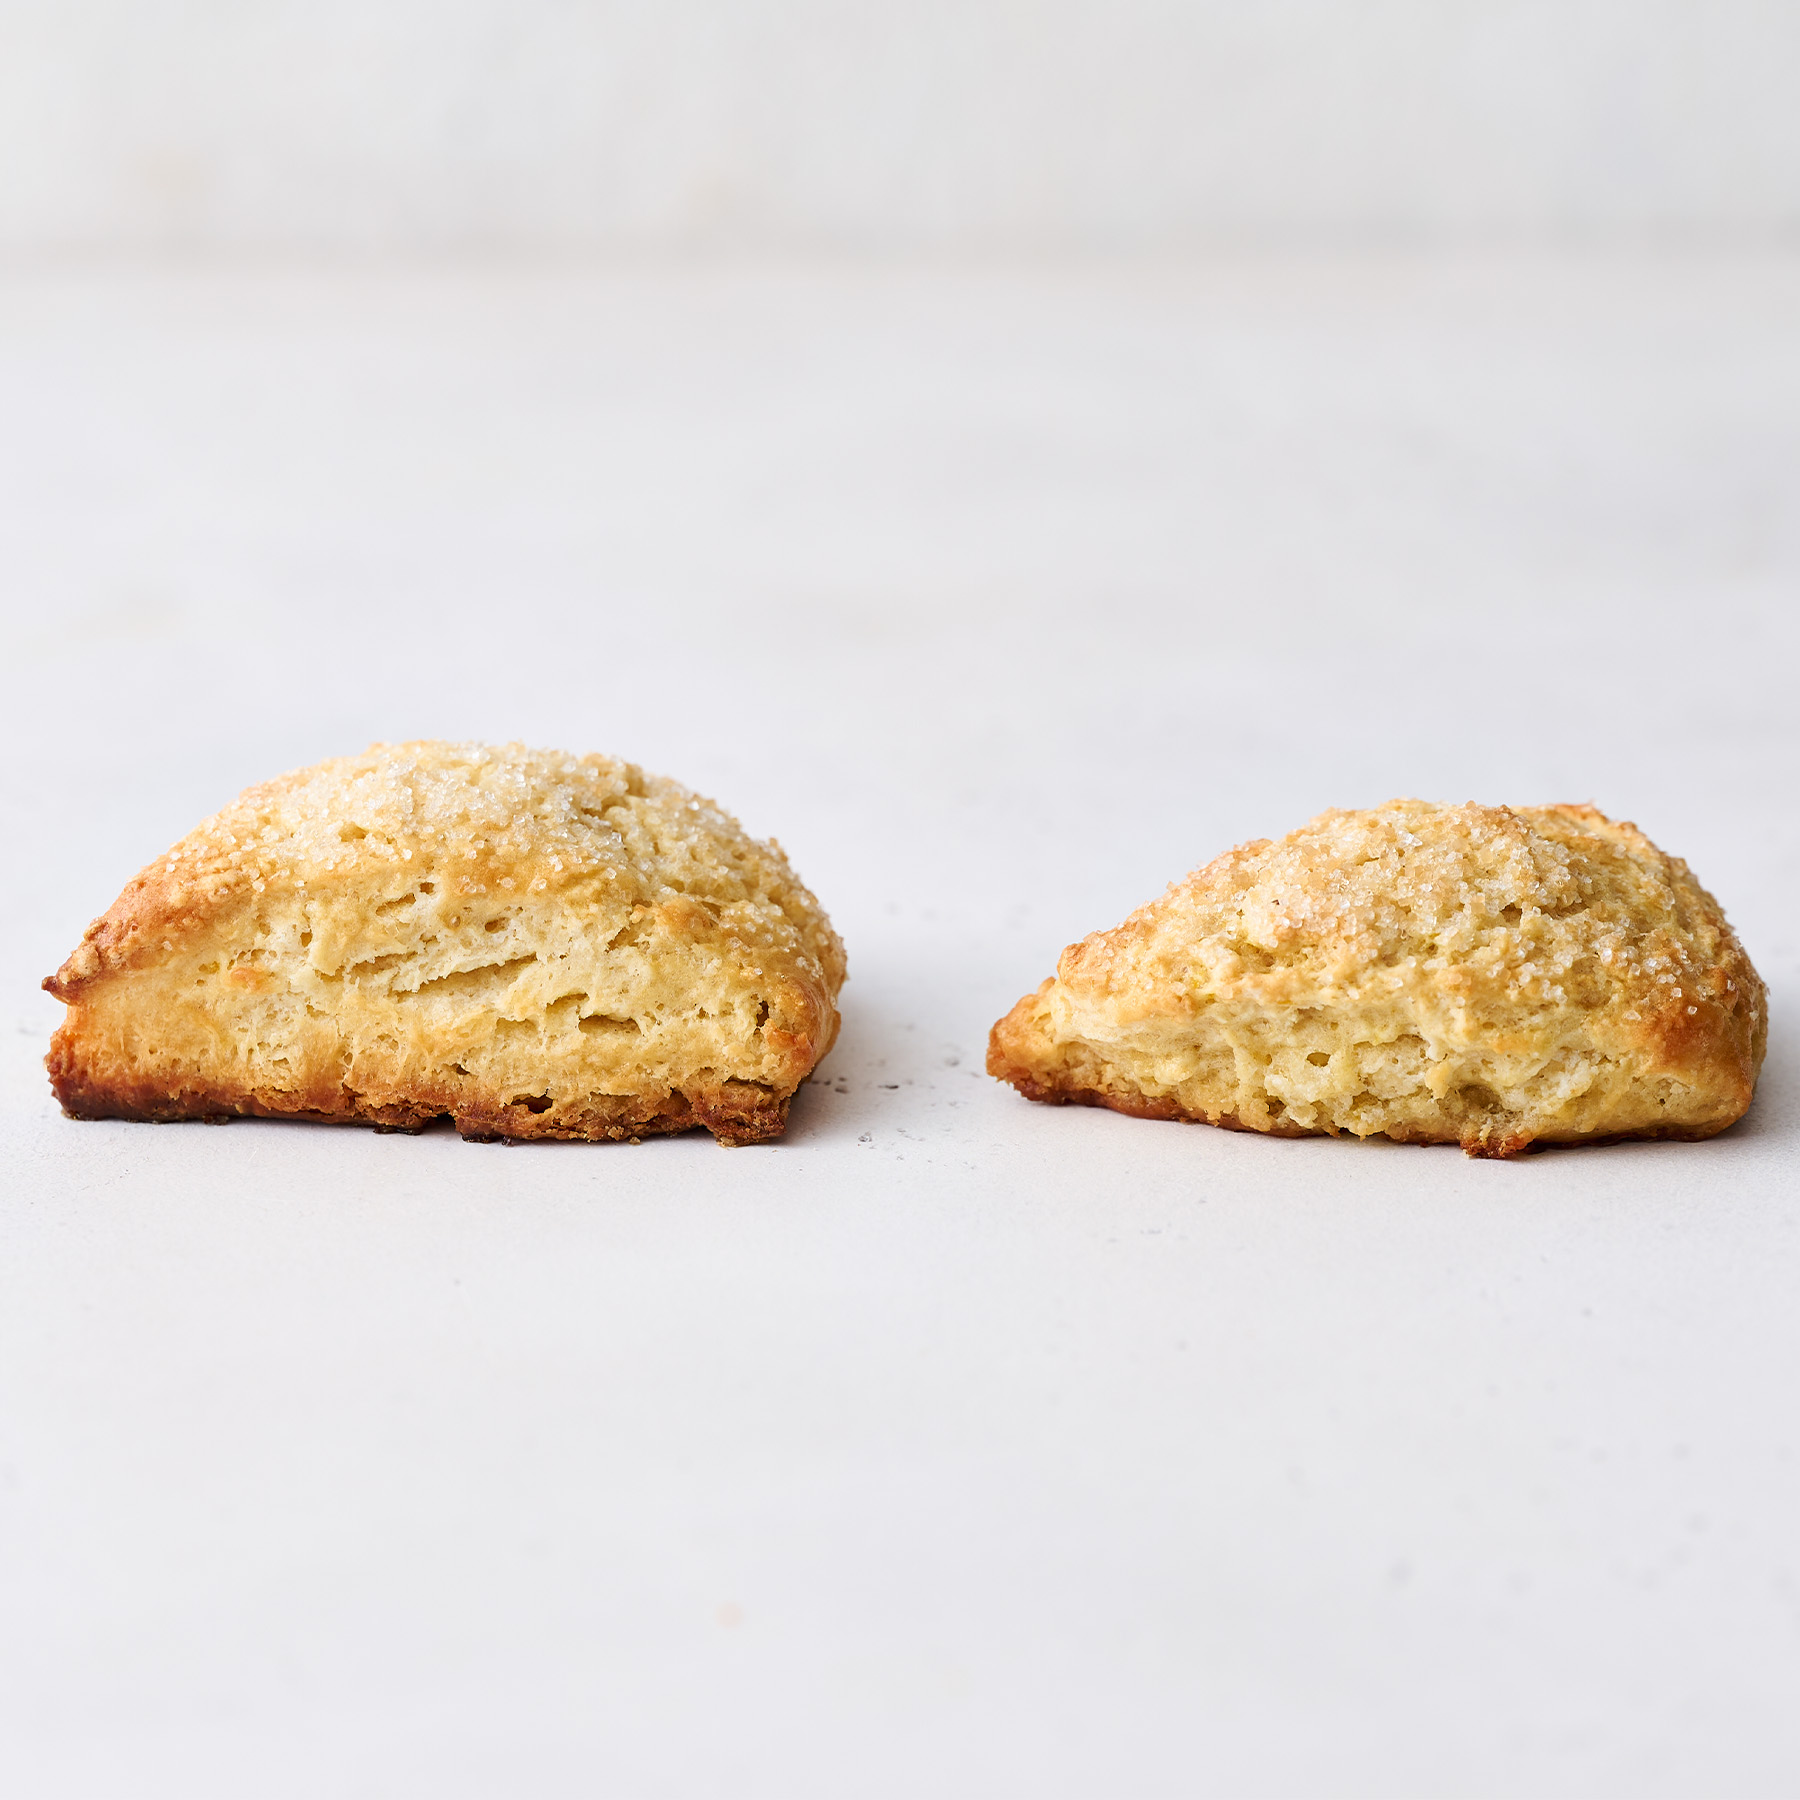 comparison of laminated vs unlaminated scones for how to get tall flaky scones that rise high